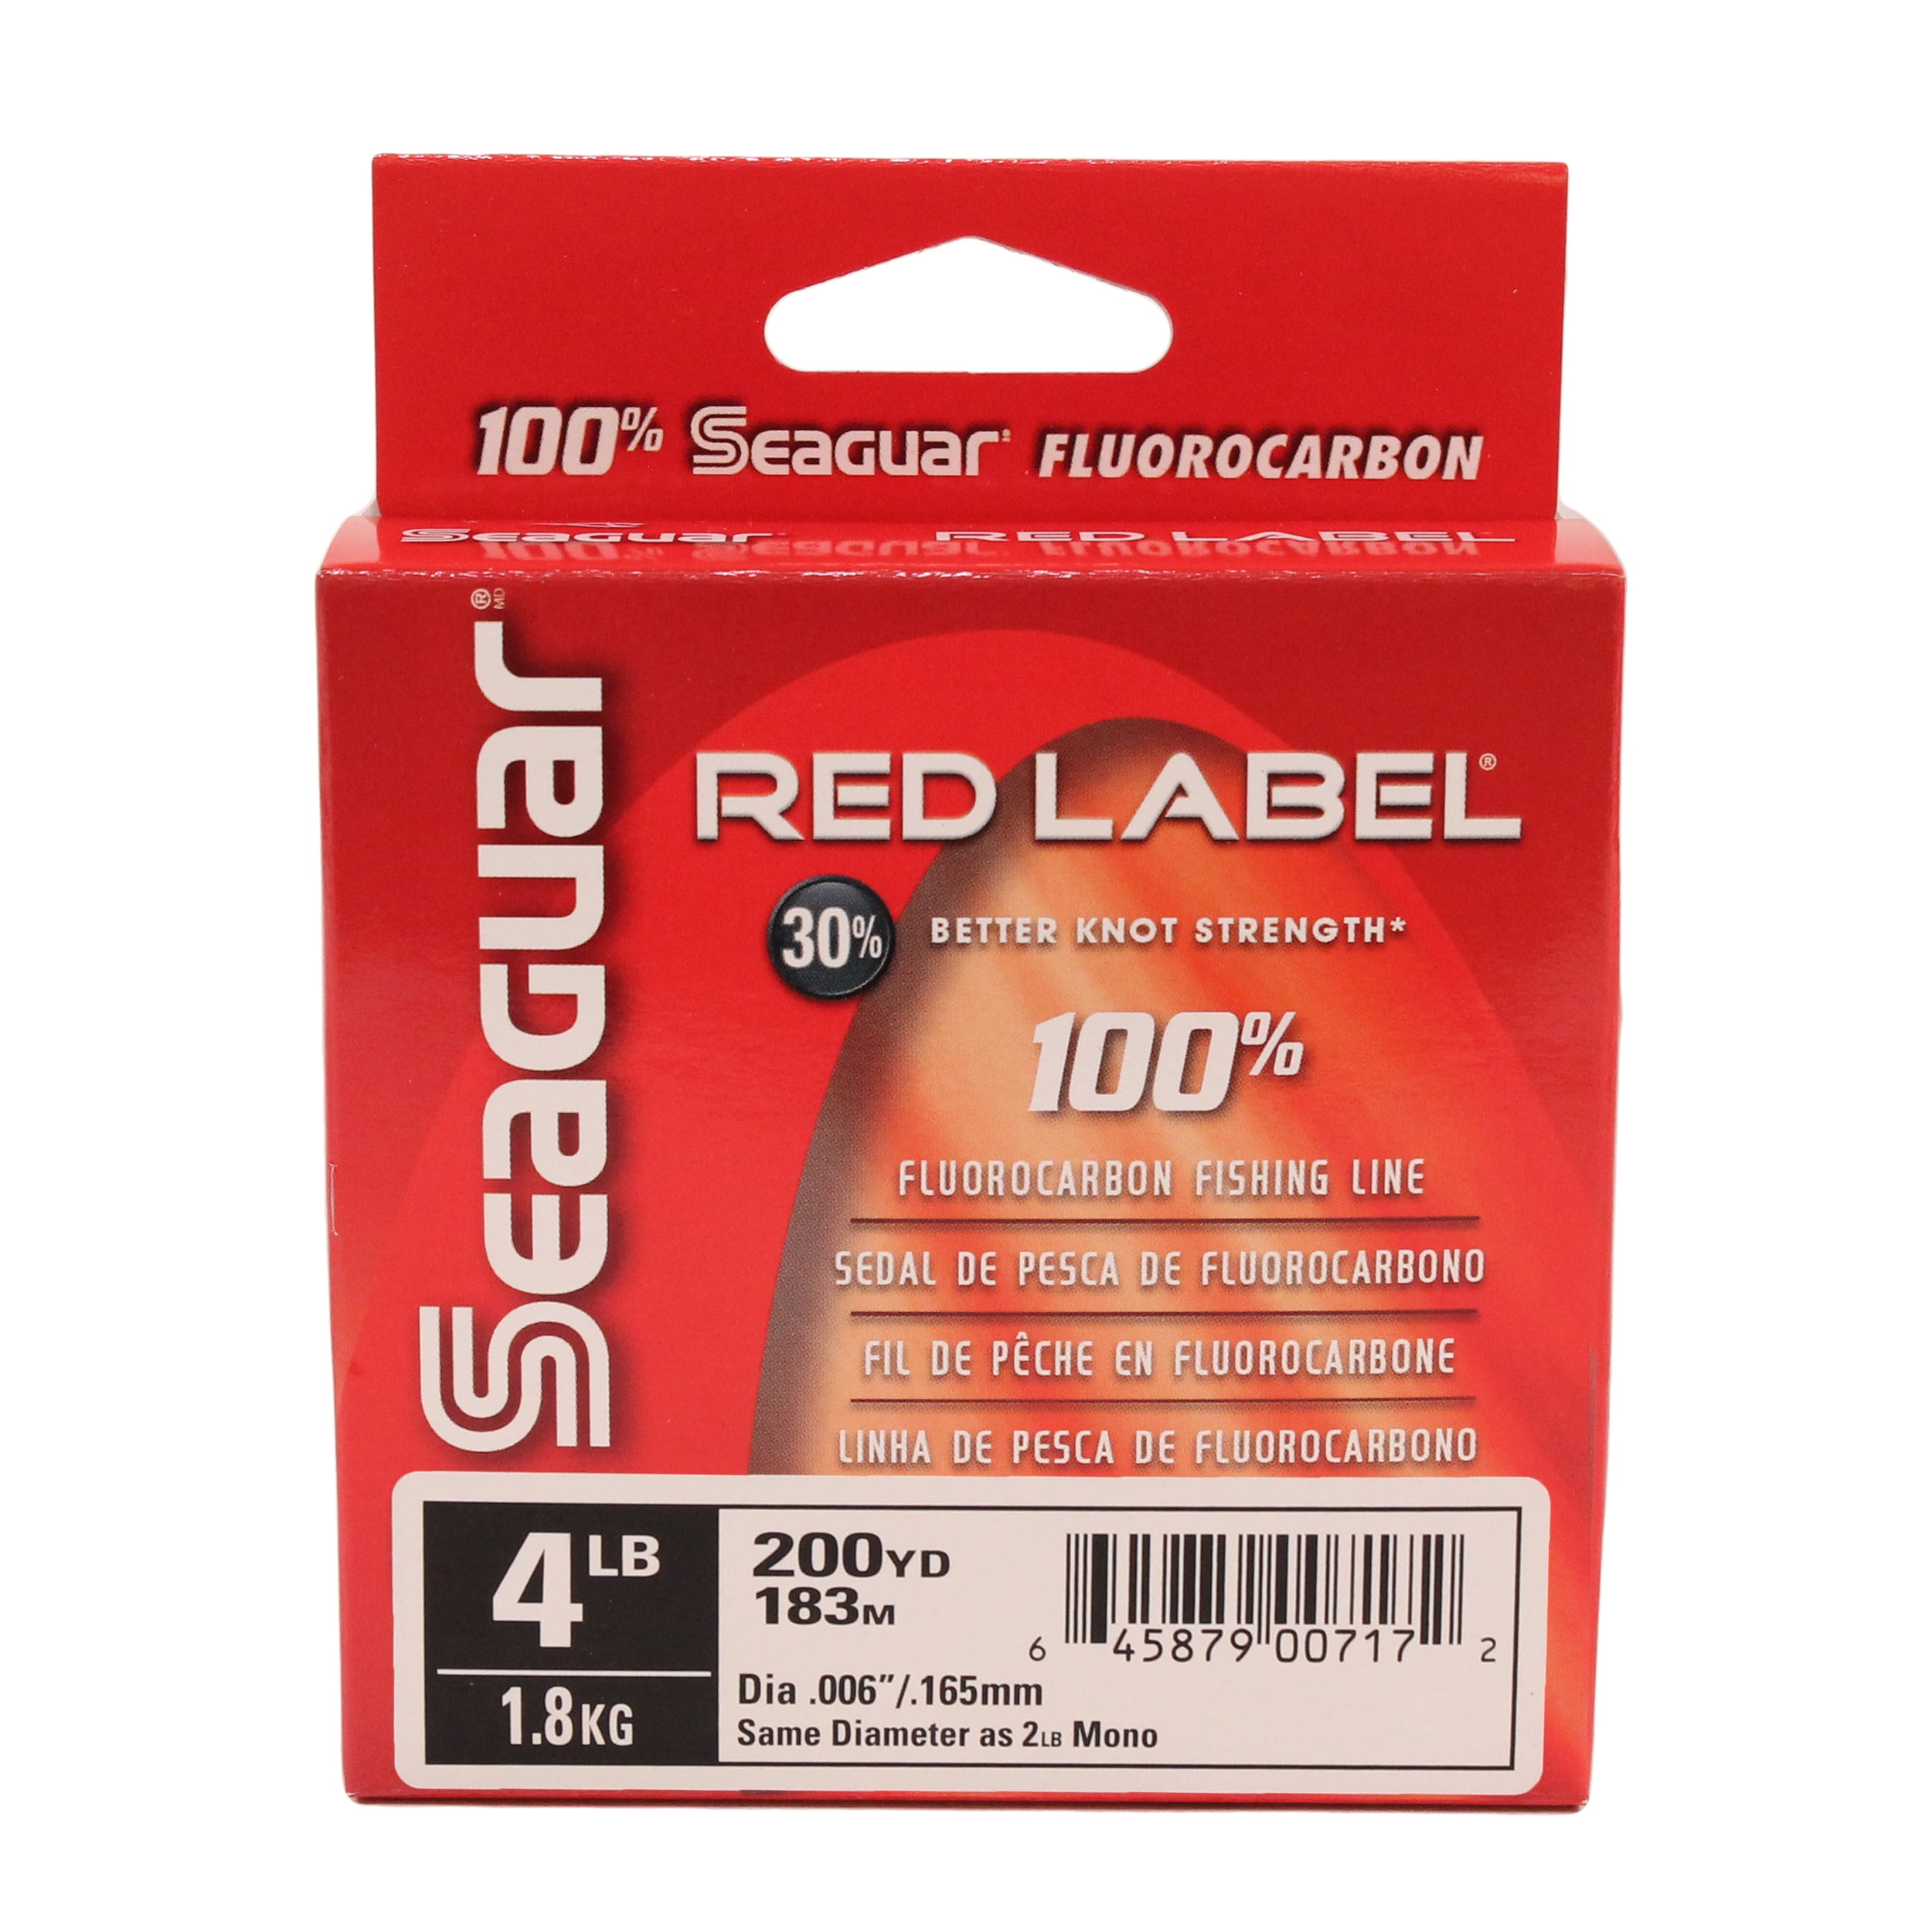 Seaguar Red Label 100% Fluorocarbon Fishing Line 4lbs, 200yds Break  Strength/Length - 04RM250 